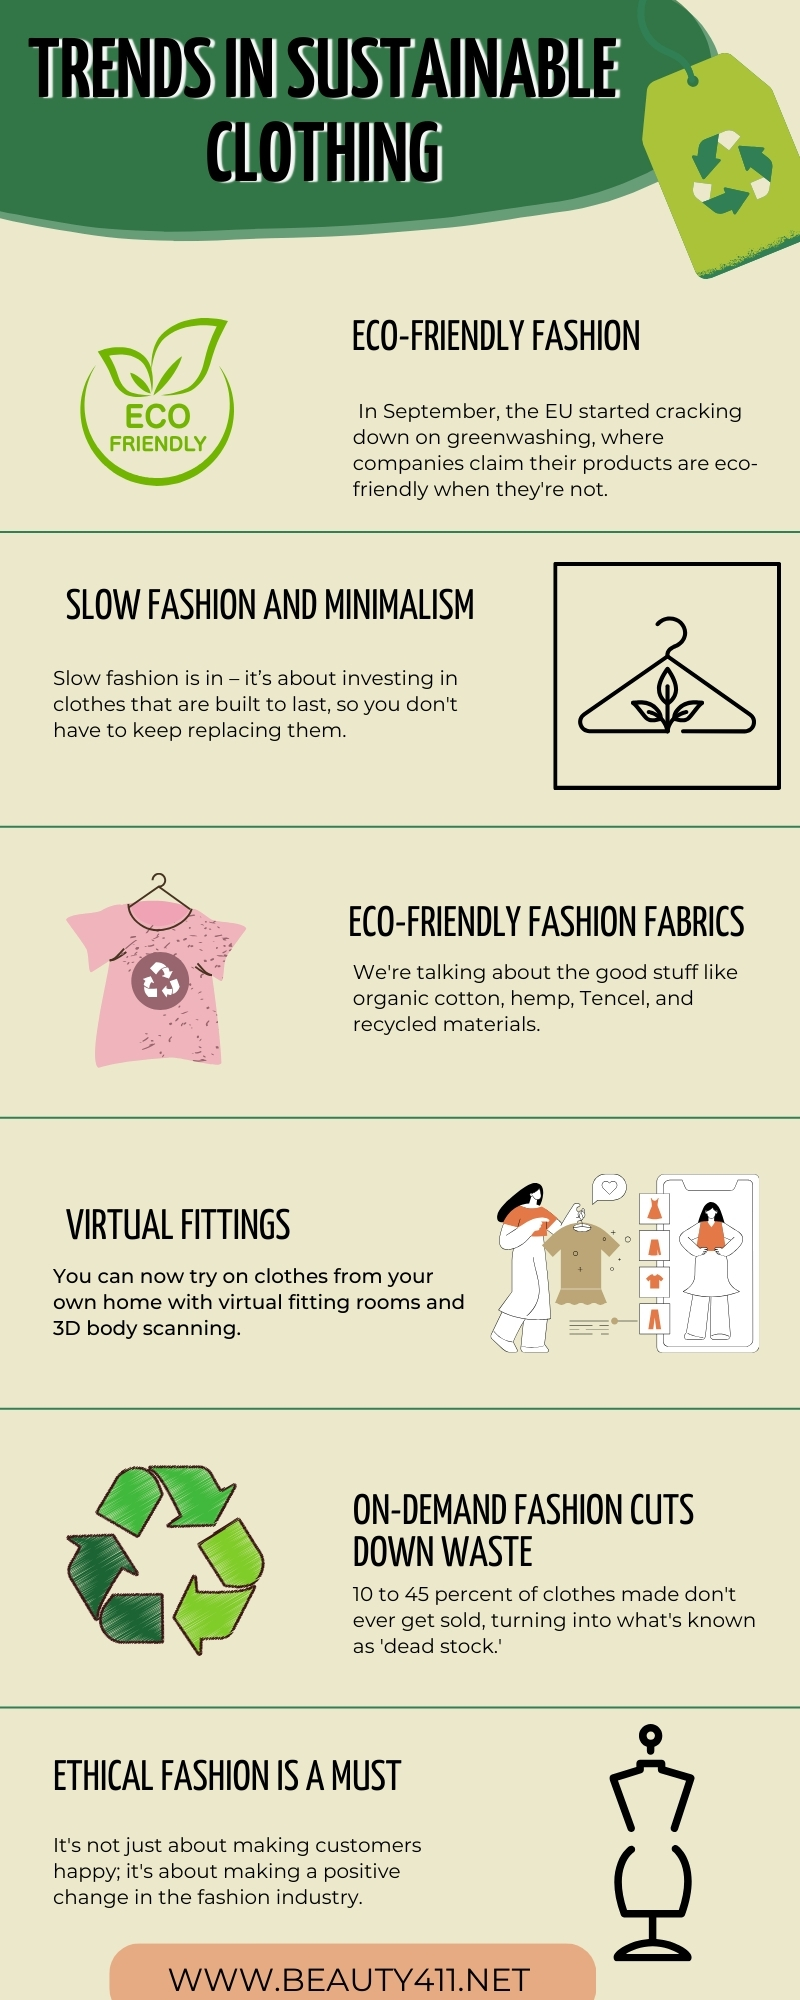 Trends in Sustainable Clothing infographic